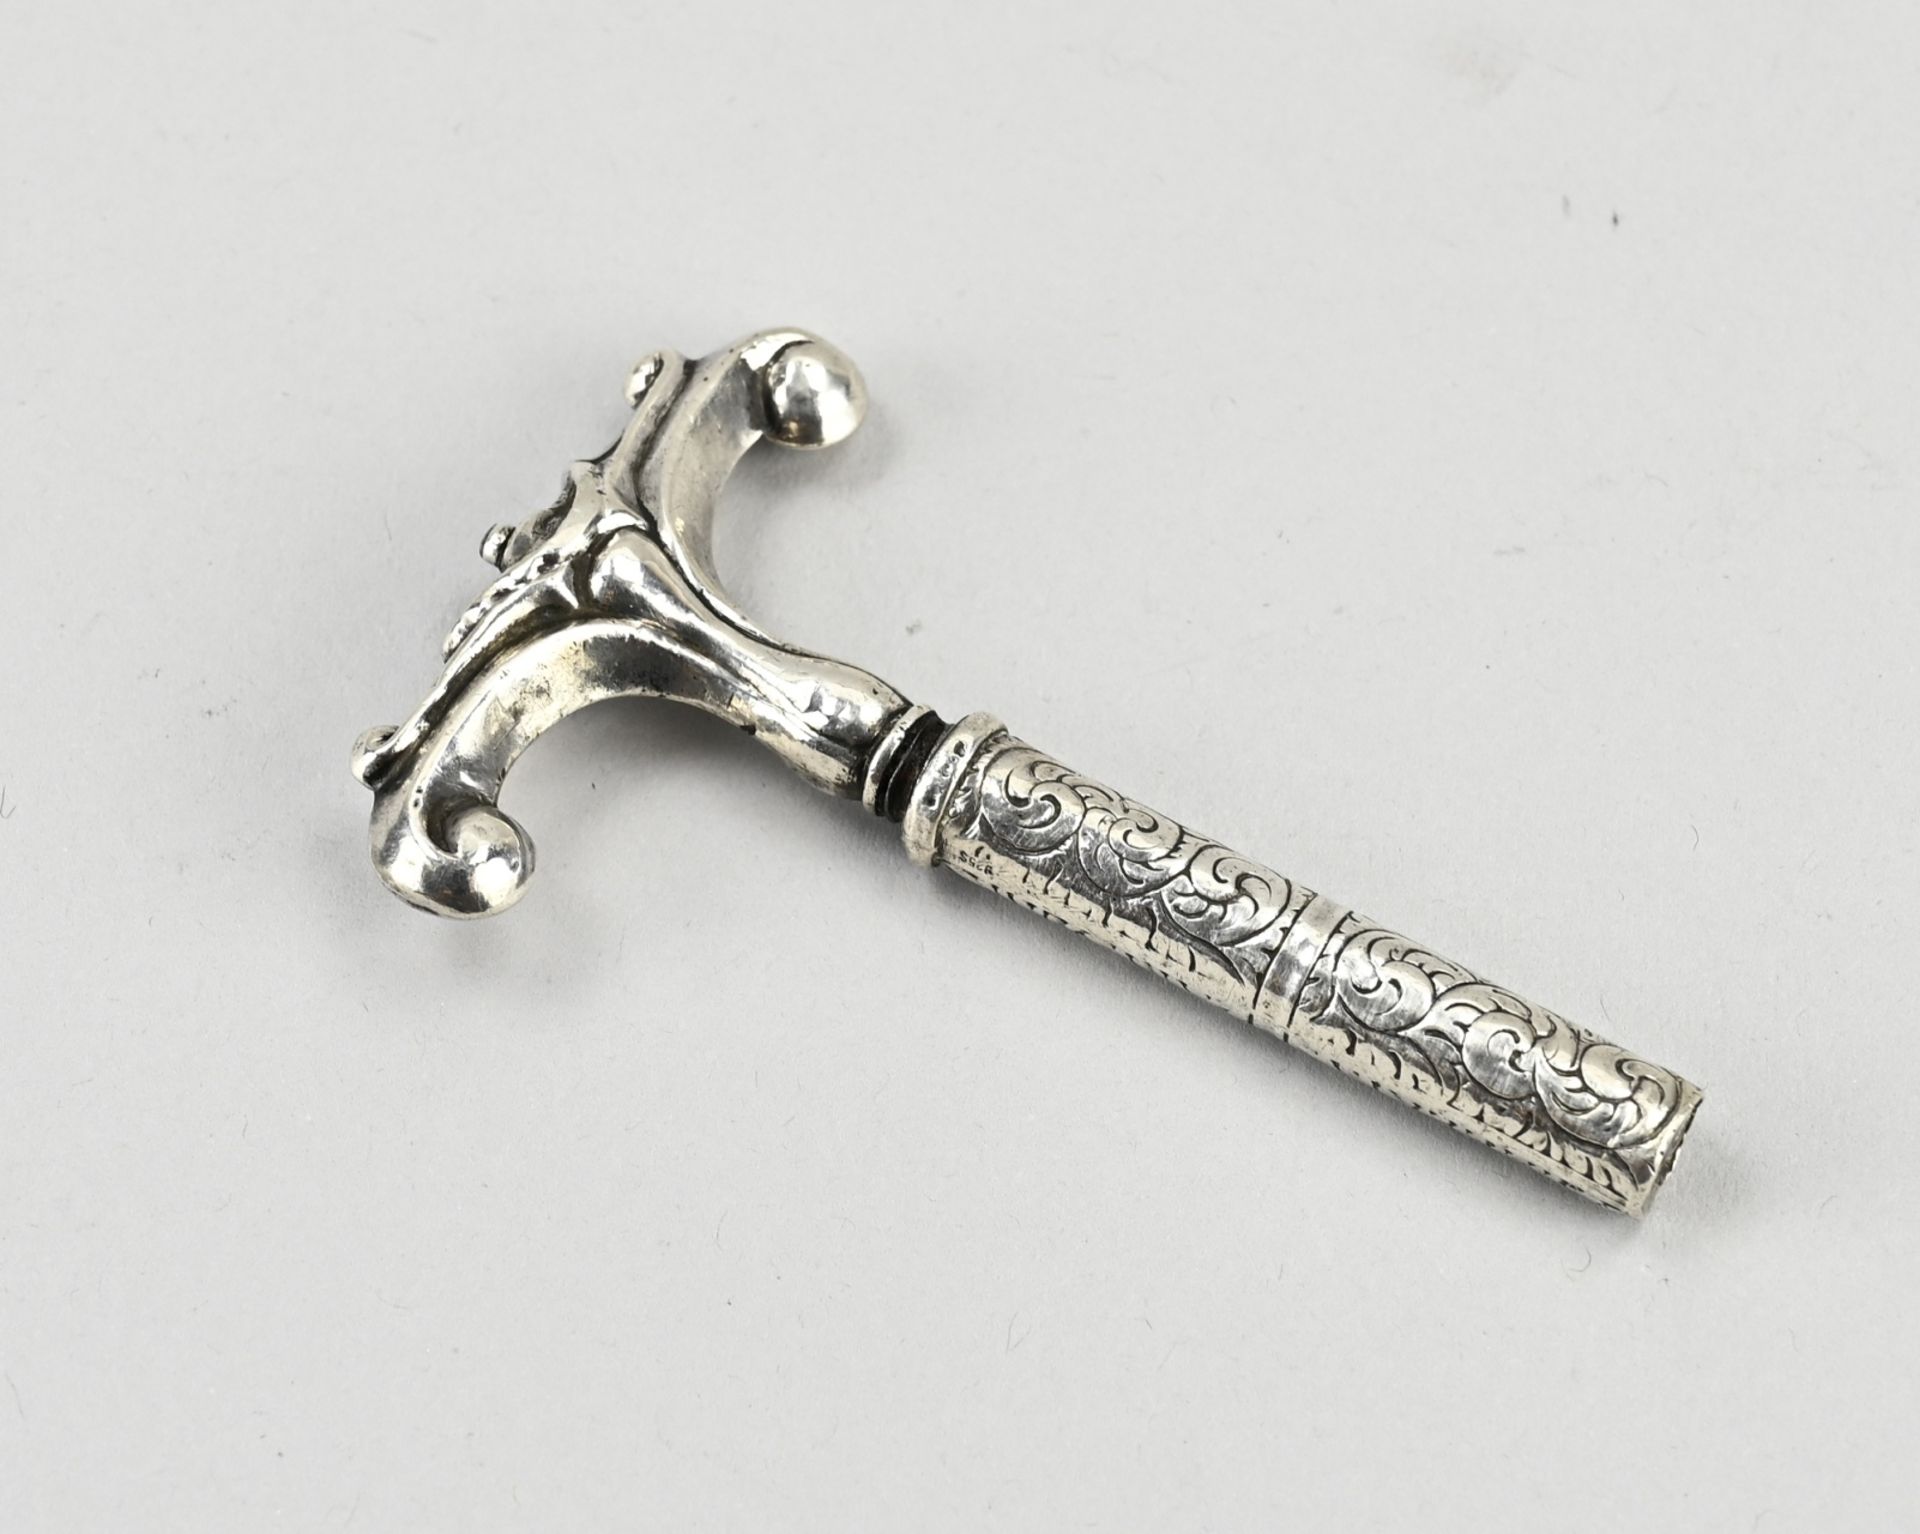 Silver corkscrew with sleeve